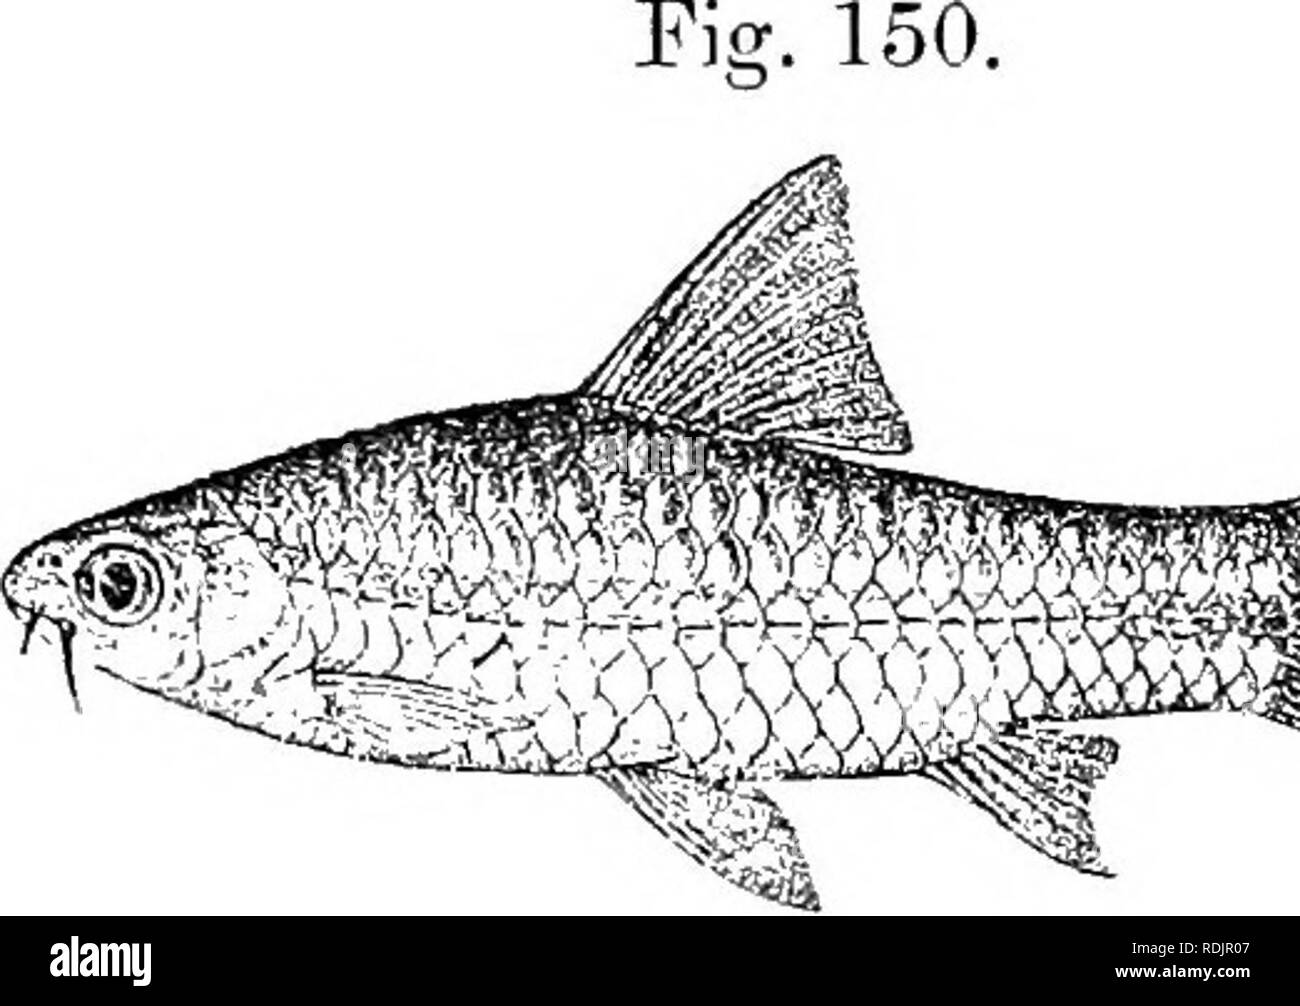 . Catalogue of the fresh-water fishes of Africa in the British museum (Natural history) ... Fishes; Freshwater animals. BAliBUS. 173 169. BARBUS NEGLECTUS. Bouleng. Ann. &amp; Mag. N. H. (7) xii. 1903, p. 532, and Fish. Nile, p. 251, pi. xlvii. fig. 5 (1907). Depth of body 3 to 3§ times in total length, length of head 4 to 4J times. Snout rounded, shorter than eye, which is 2^ to 3 times in length of head and equals iuterorbital width ; mouth small, terminal or subinferior ; lips feebly developed ; two barbels on each side, anterior half diameter of eye, posterior as long as eye or a little sh Stock Photo